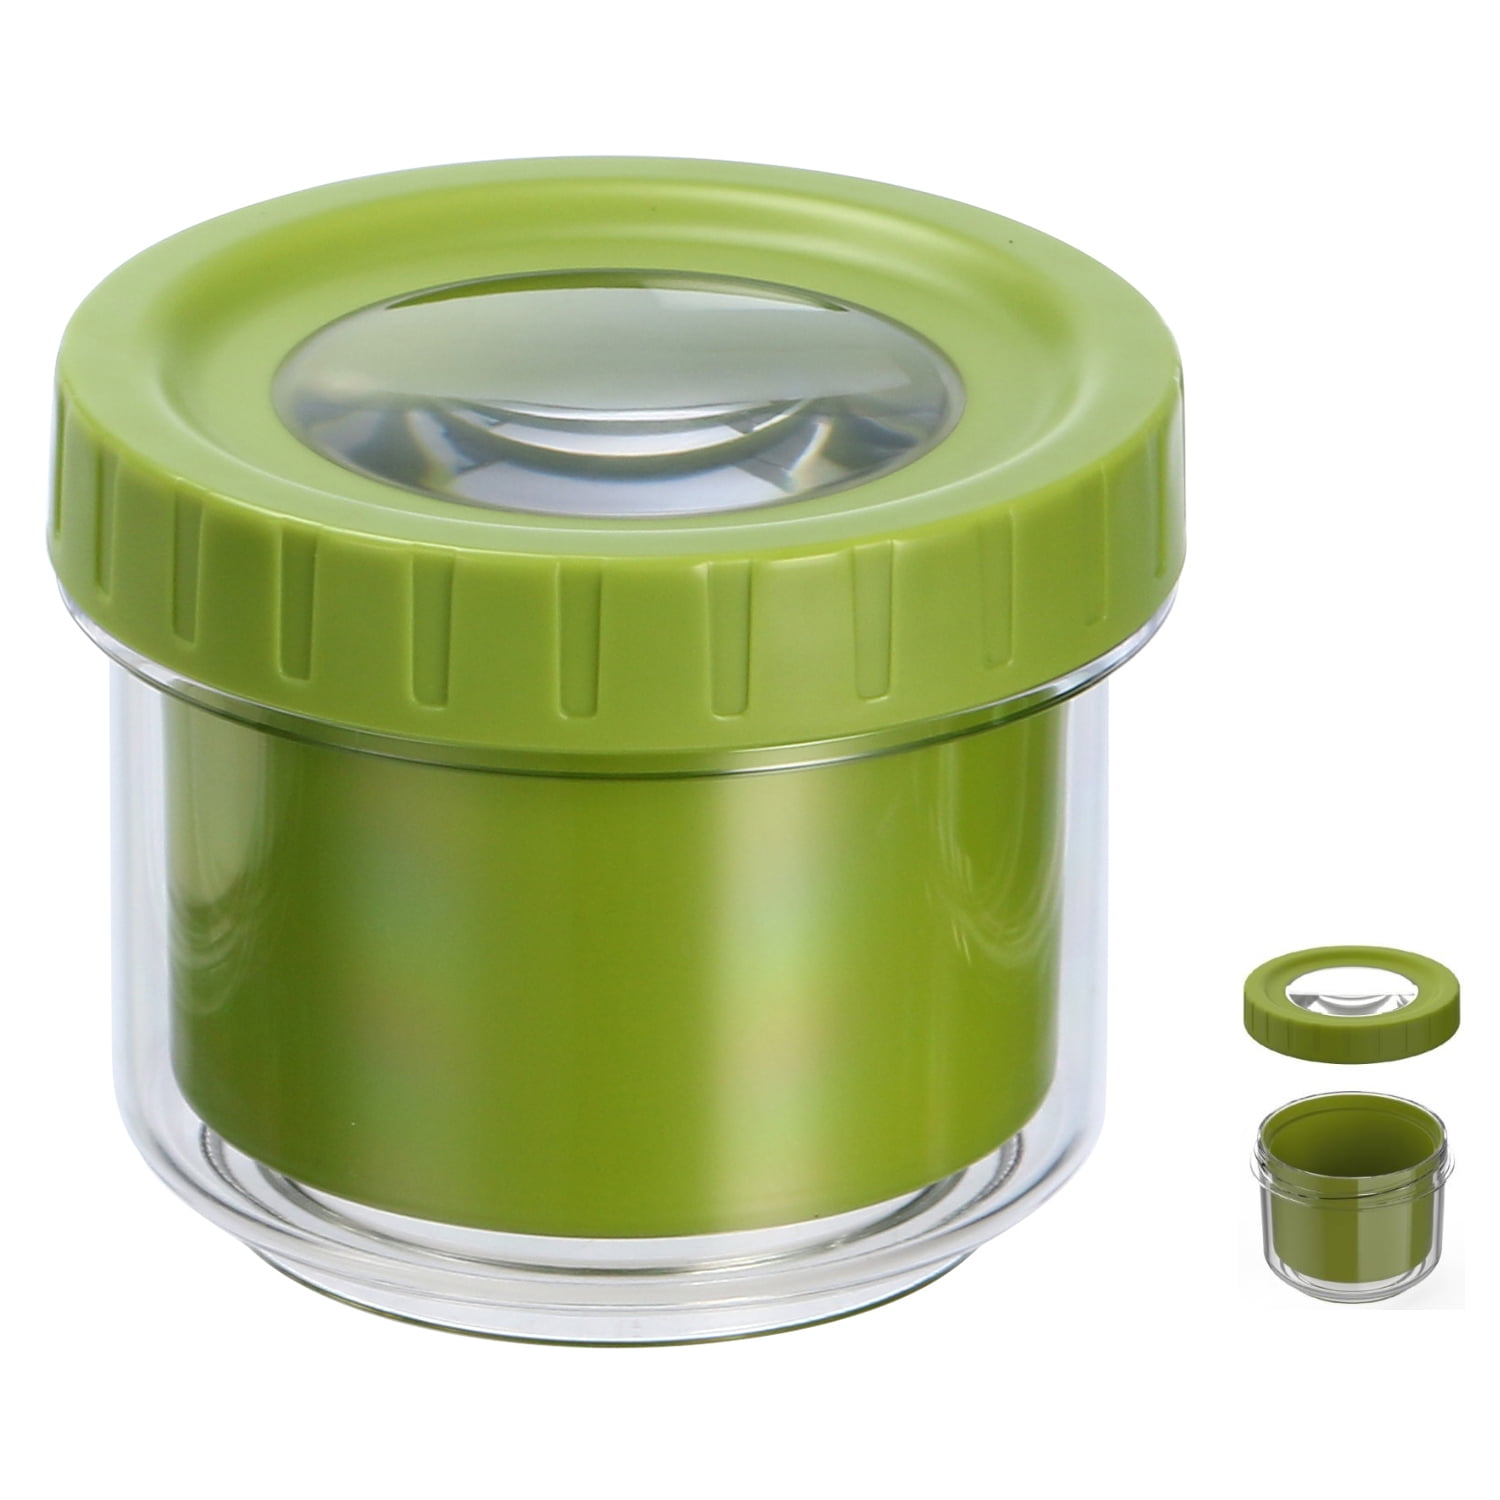 NEW Seal'In Food Storage Vacuum Containers with "Patented Design" Set of 3 Green 